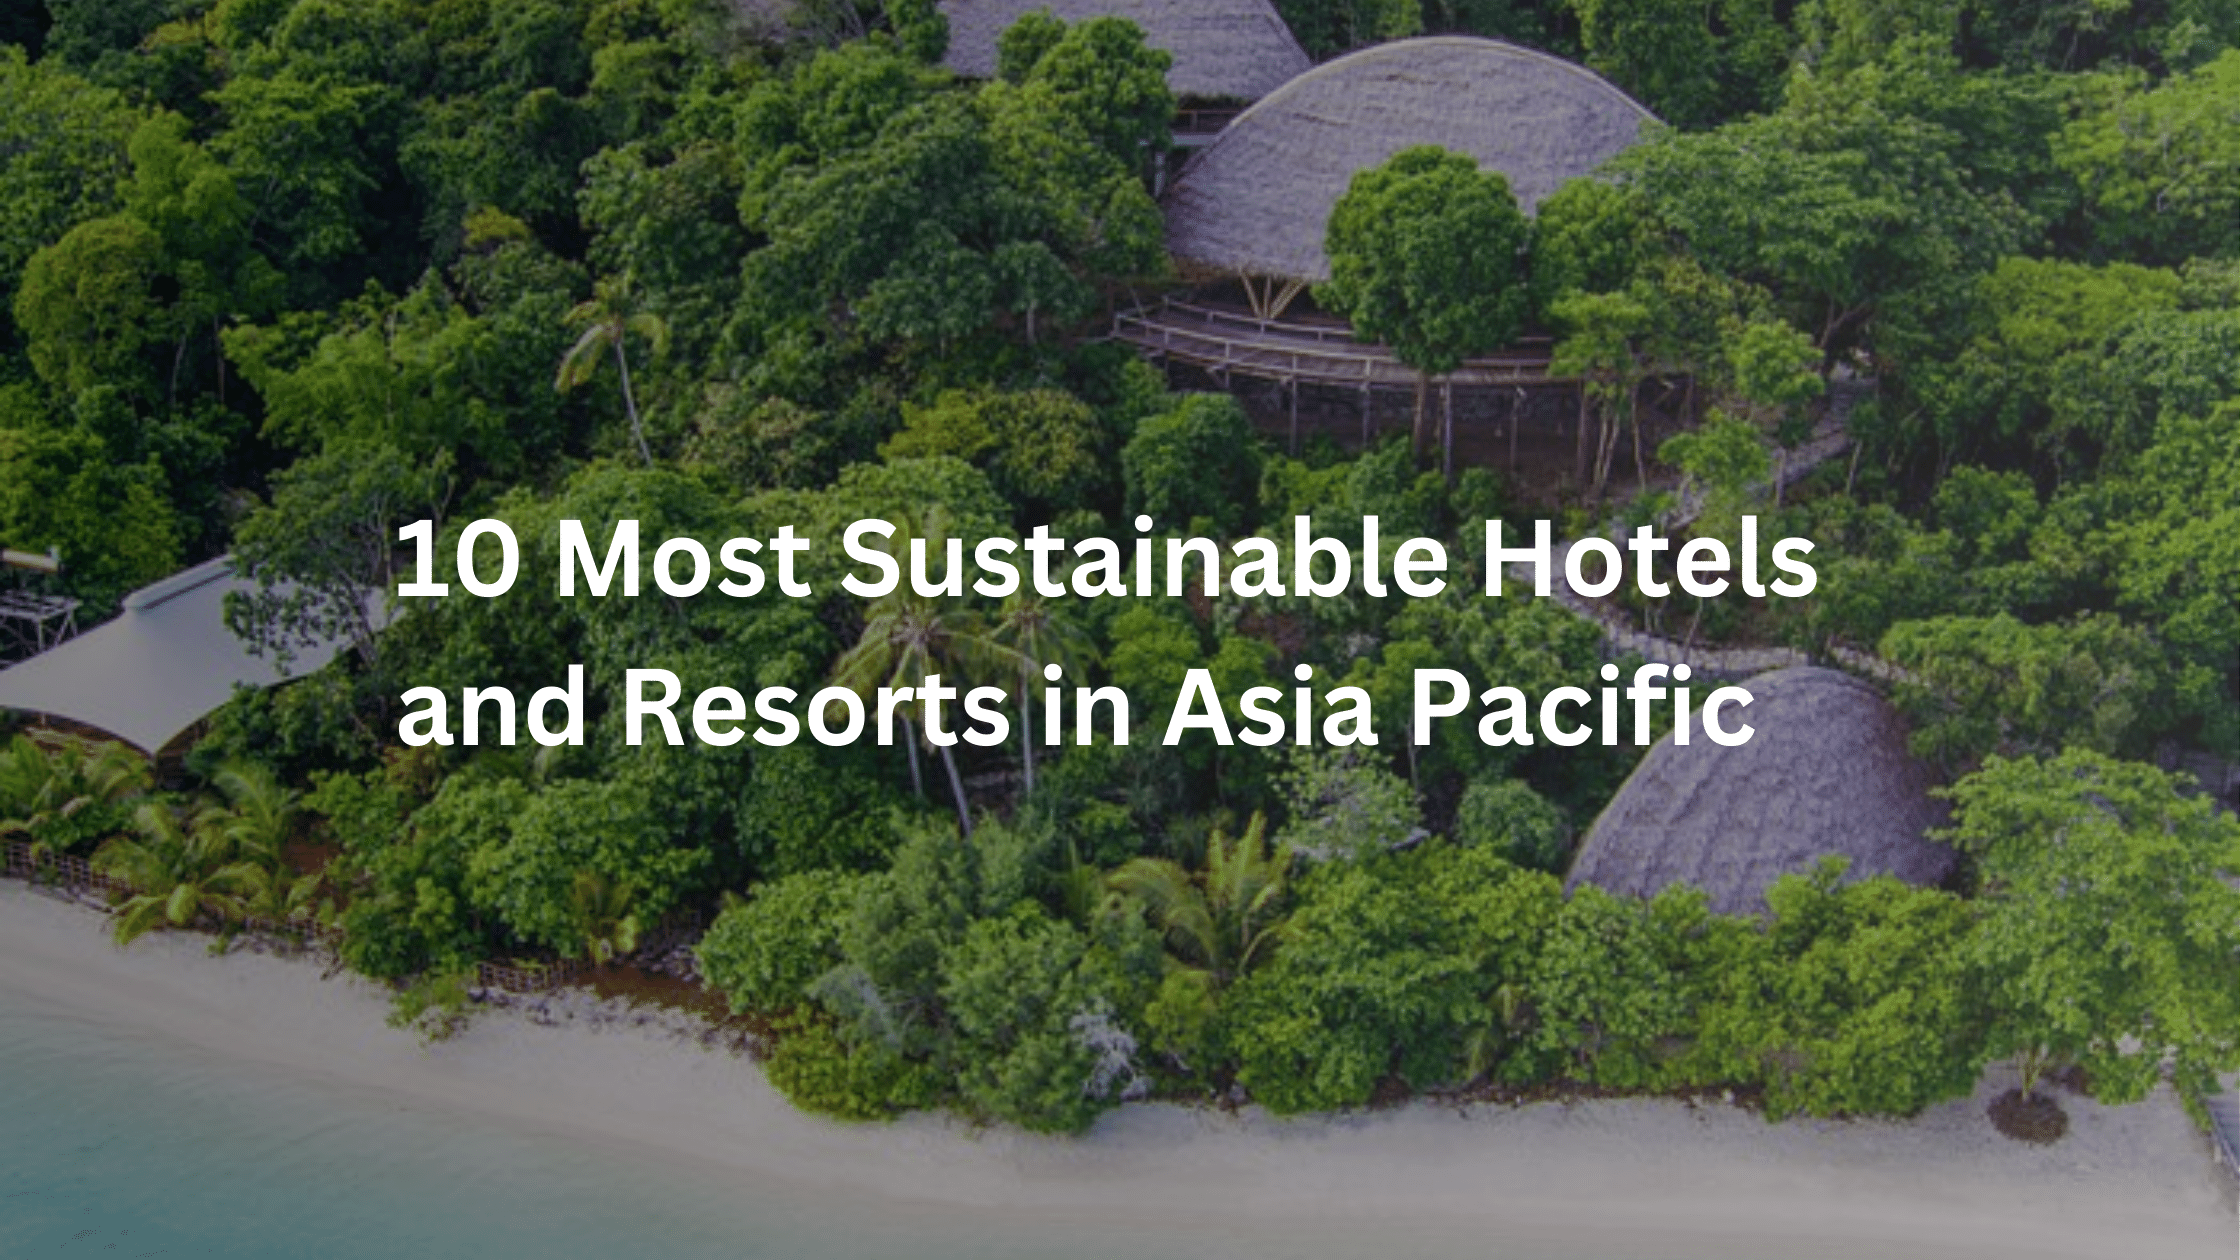 10 Most Sustainable Hotels and Resorts in Asia Pacific.